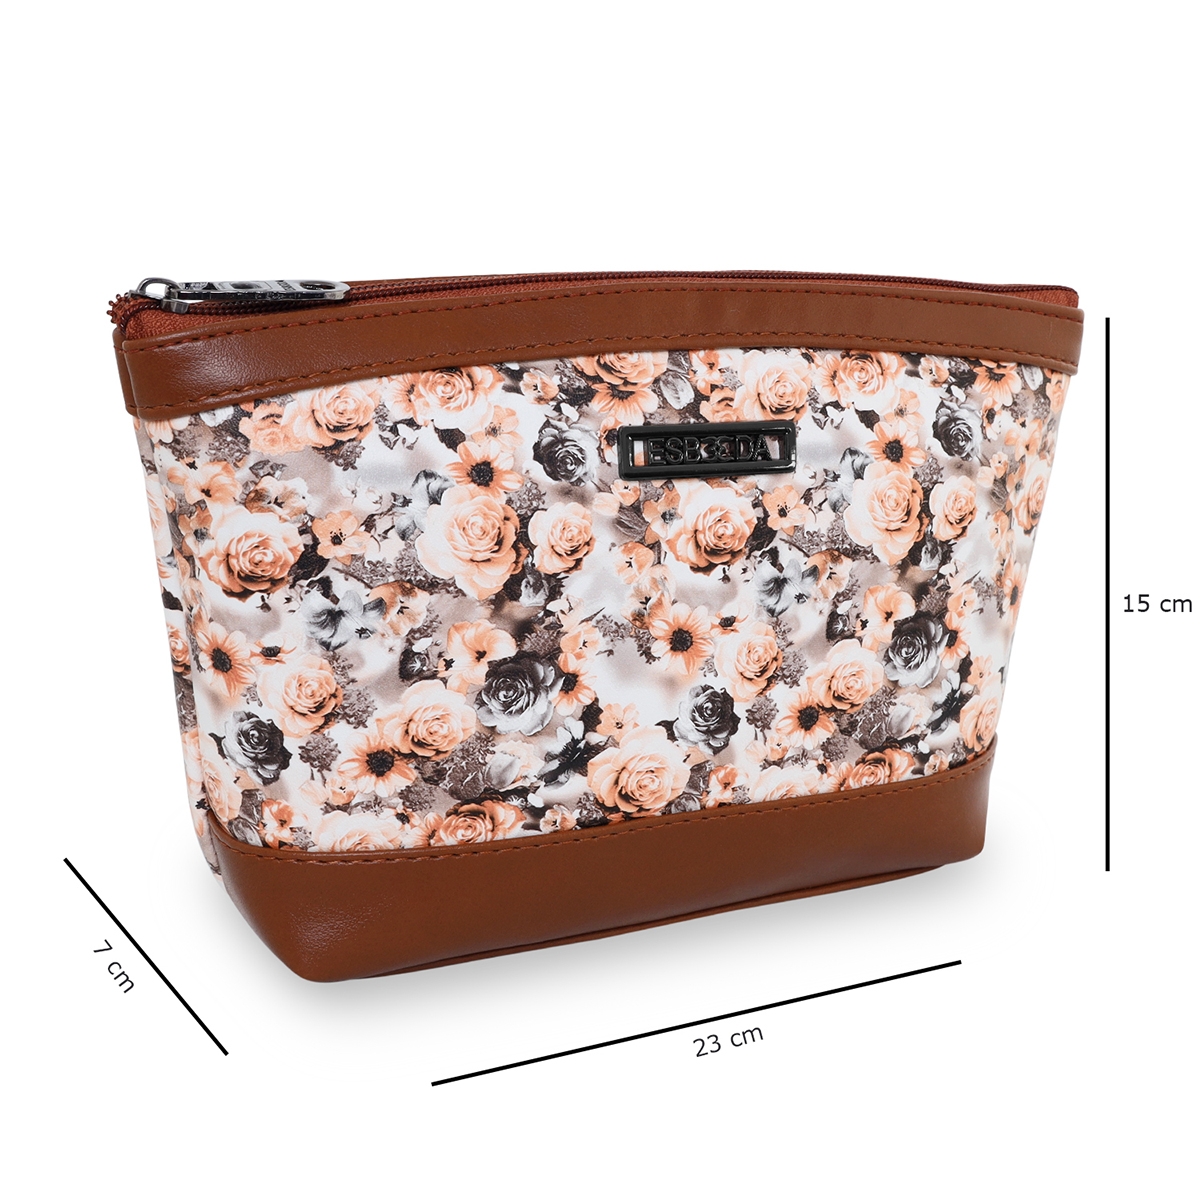 ESBEDA | ESBEDA Tan Color Floral Print Pouch For Women Pack of 2 2